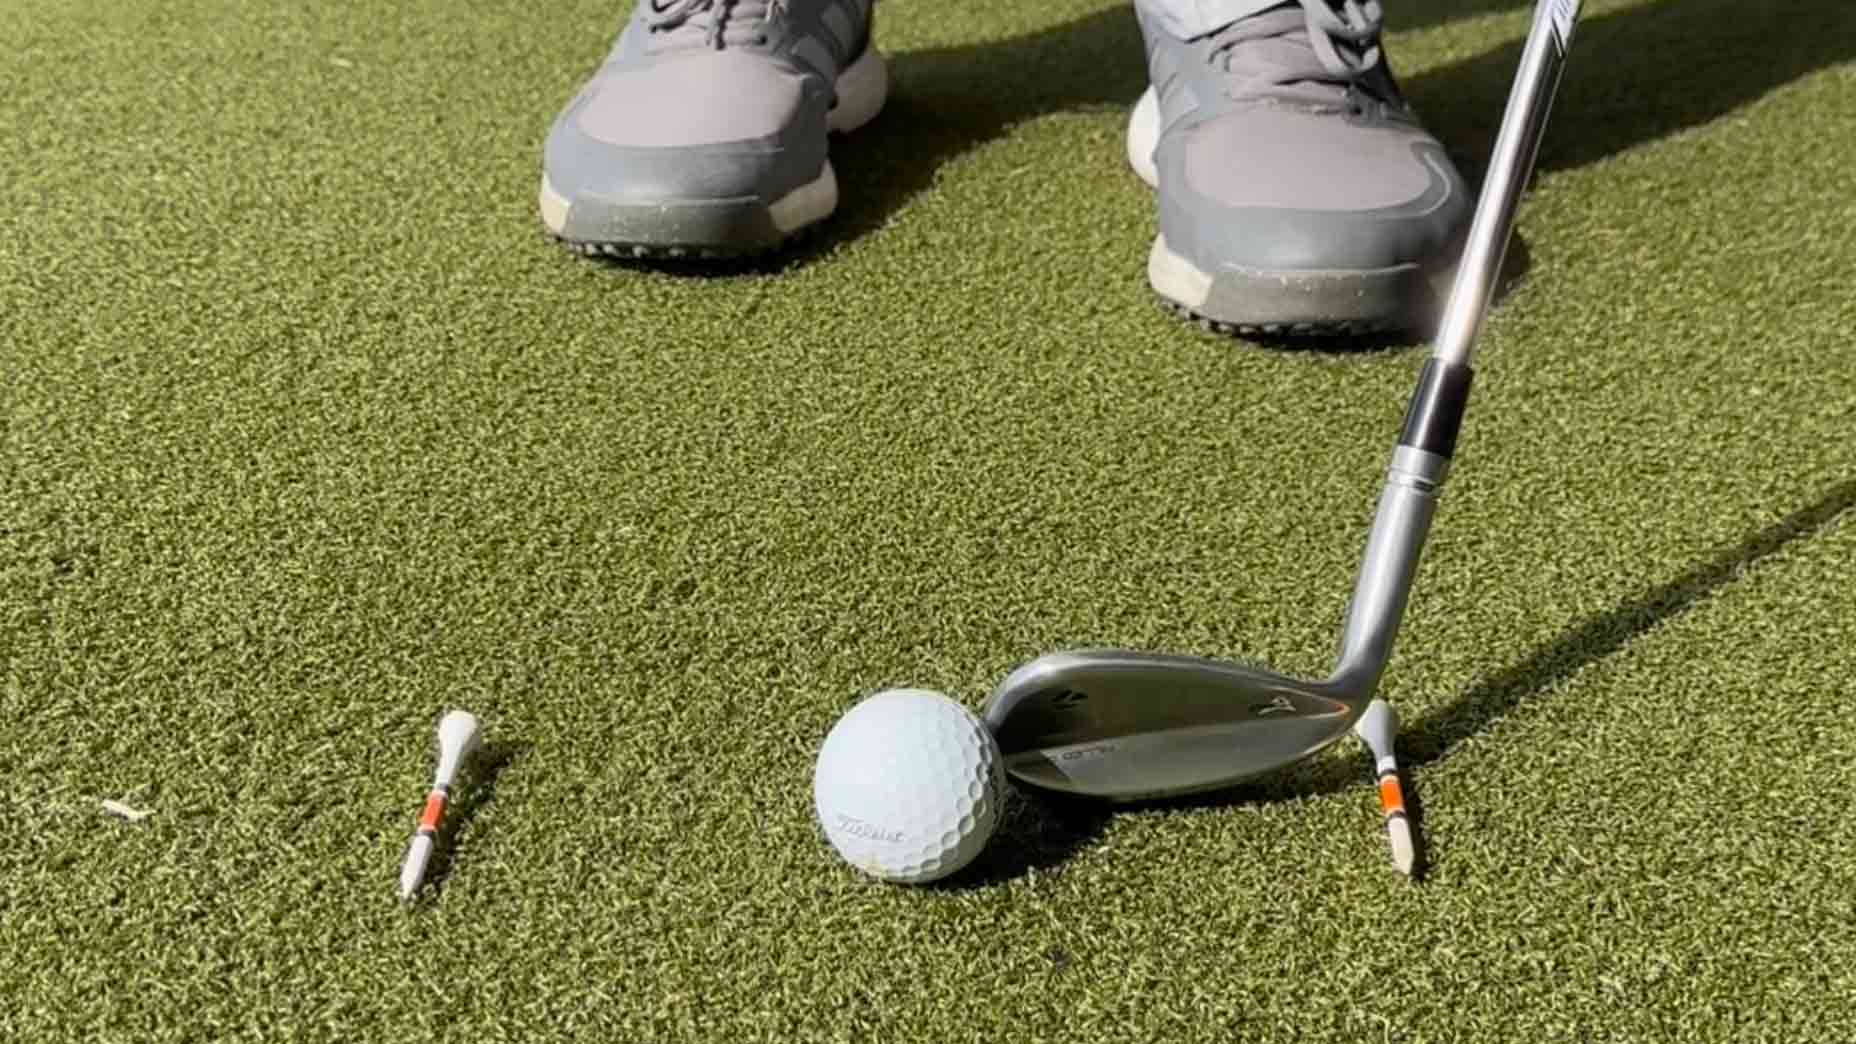 Golf teacher Nick Kumpis shows a clever trick that uses two tees to help find the low point of the golf club and improve contact